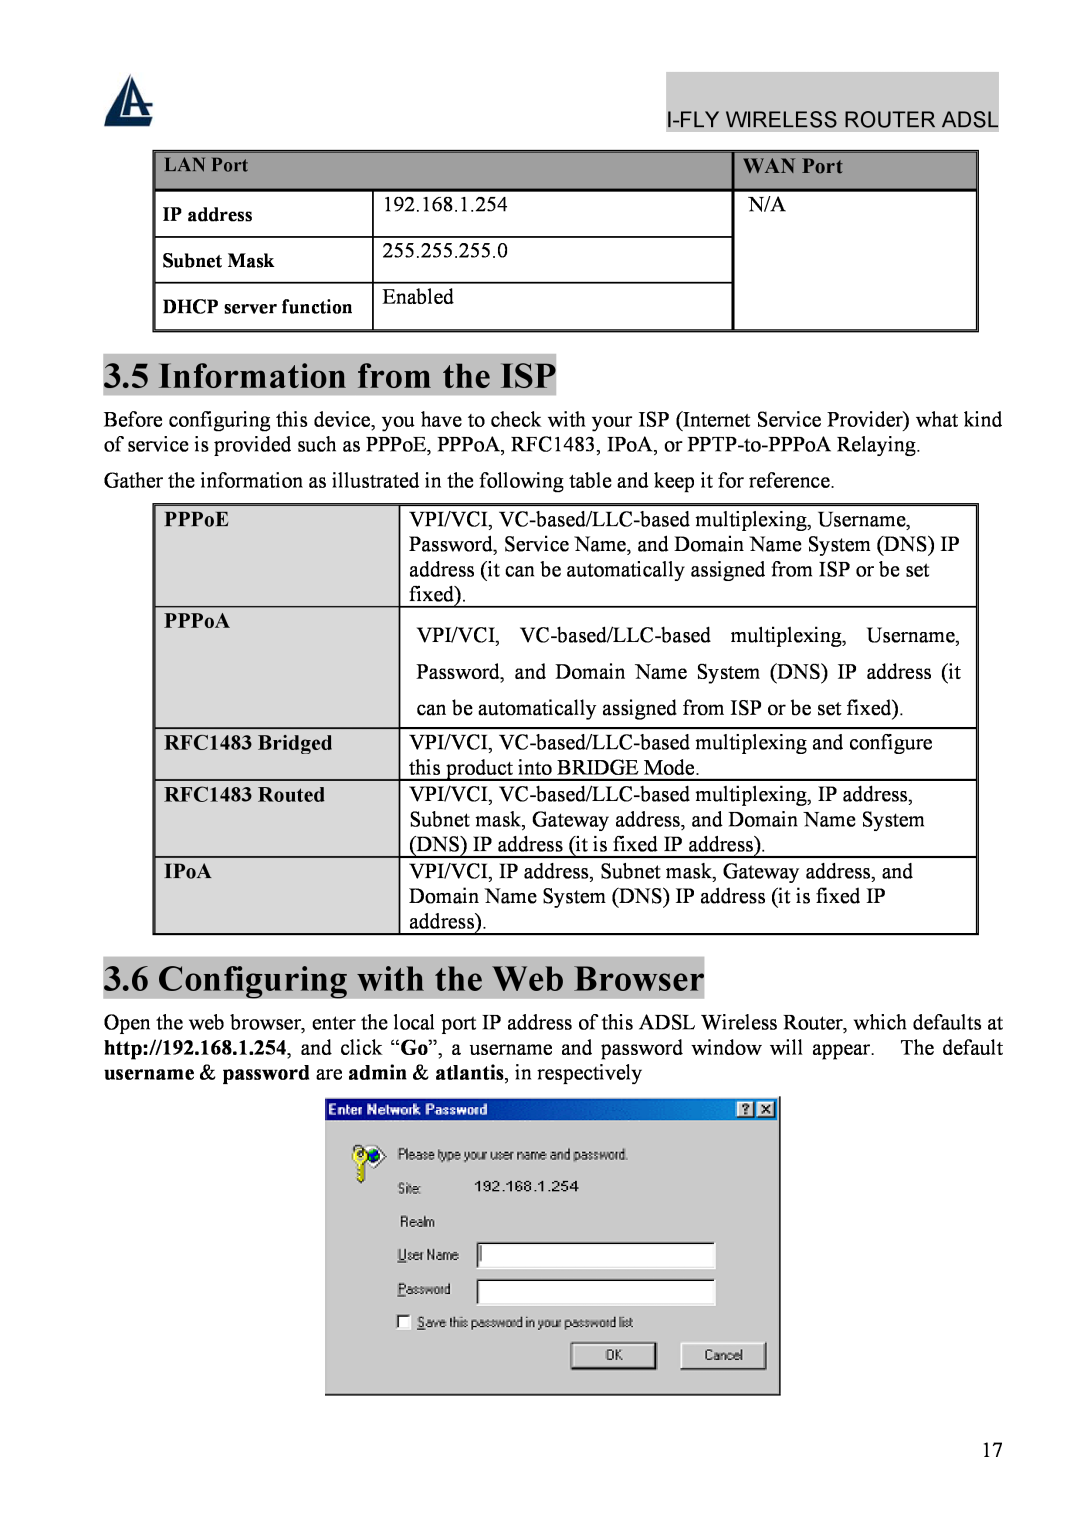 Atlantis Land A02-WRA4-54G Information from the ISP, Configuring with the Web Browser, WAN Port, 192.168.1.254, Enabled 